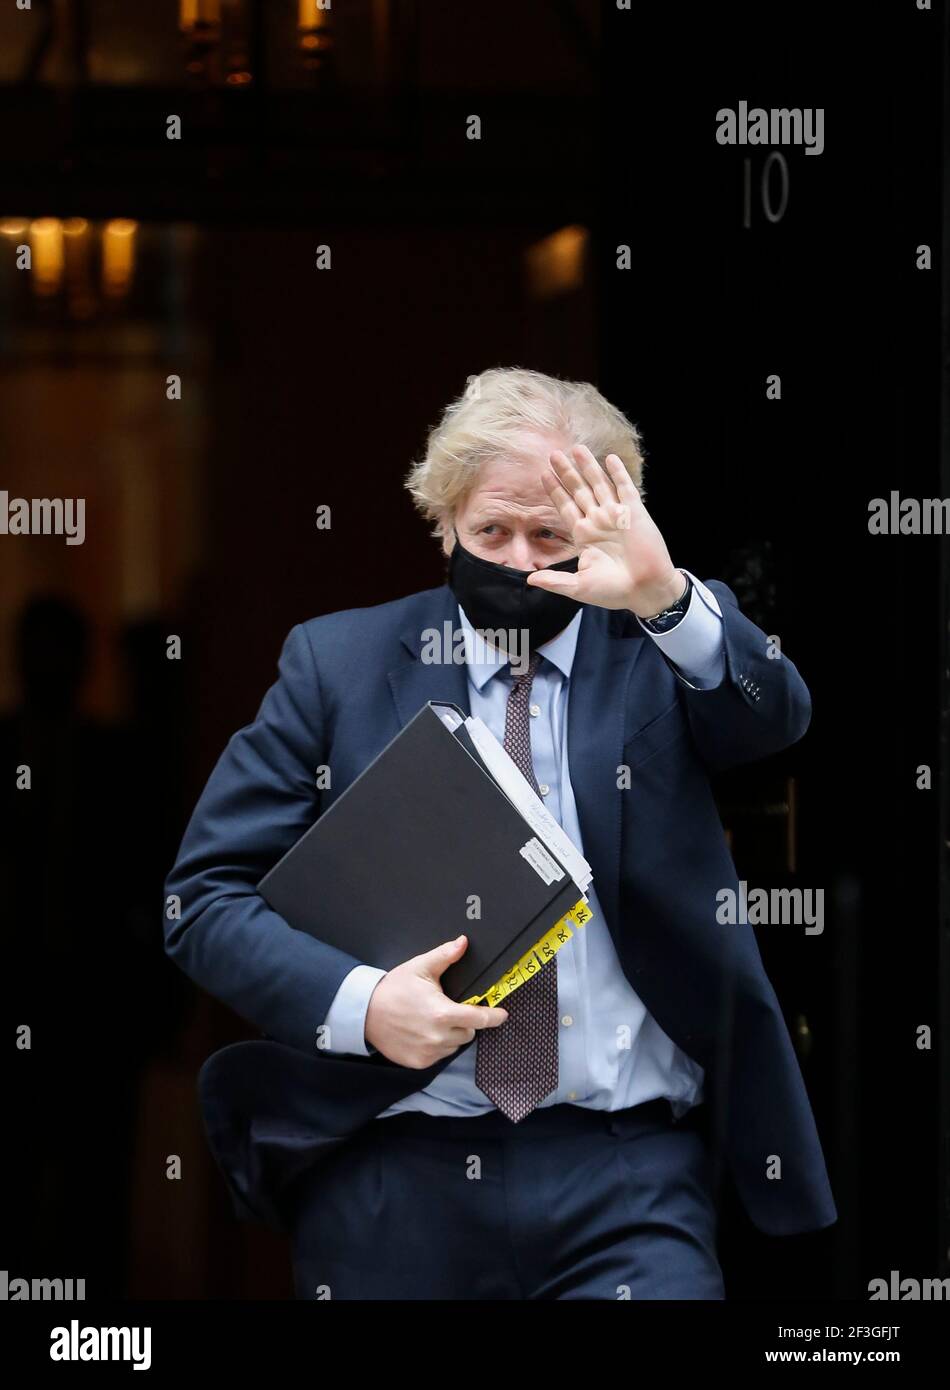 (210317) -- LONDON, March 17, 2021 (Xinhua) -- British Prime Minister Boris Johnson leaves 10 Downing Street for the House of Commons to make a statement on the Integrated Review of Security, Defence, Development and Foreign Policy in London, Britain, on March 16, 2021. Britain is set to reverse its previous policy to reduce its stockpile of nuclear weapons and instead plans to increase the number of nuclear warheads to 260, the British government announced Tuesday. The latest development came as Britain on Tuesday published the 114-page Integrated Review of Security, Defense, Development a Stock Photo